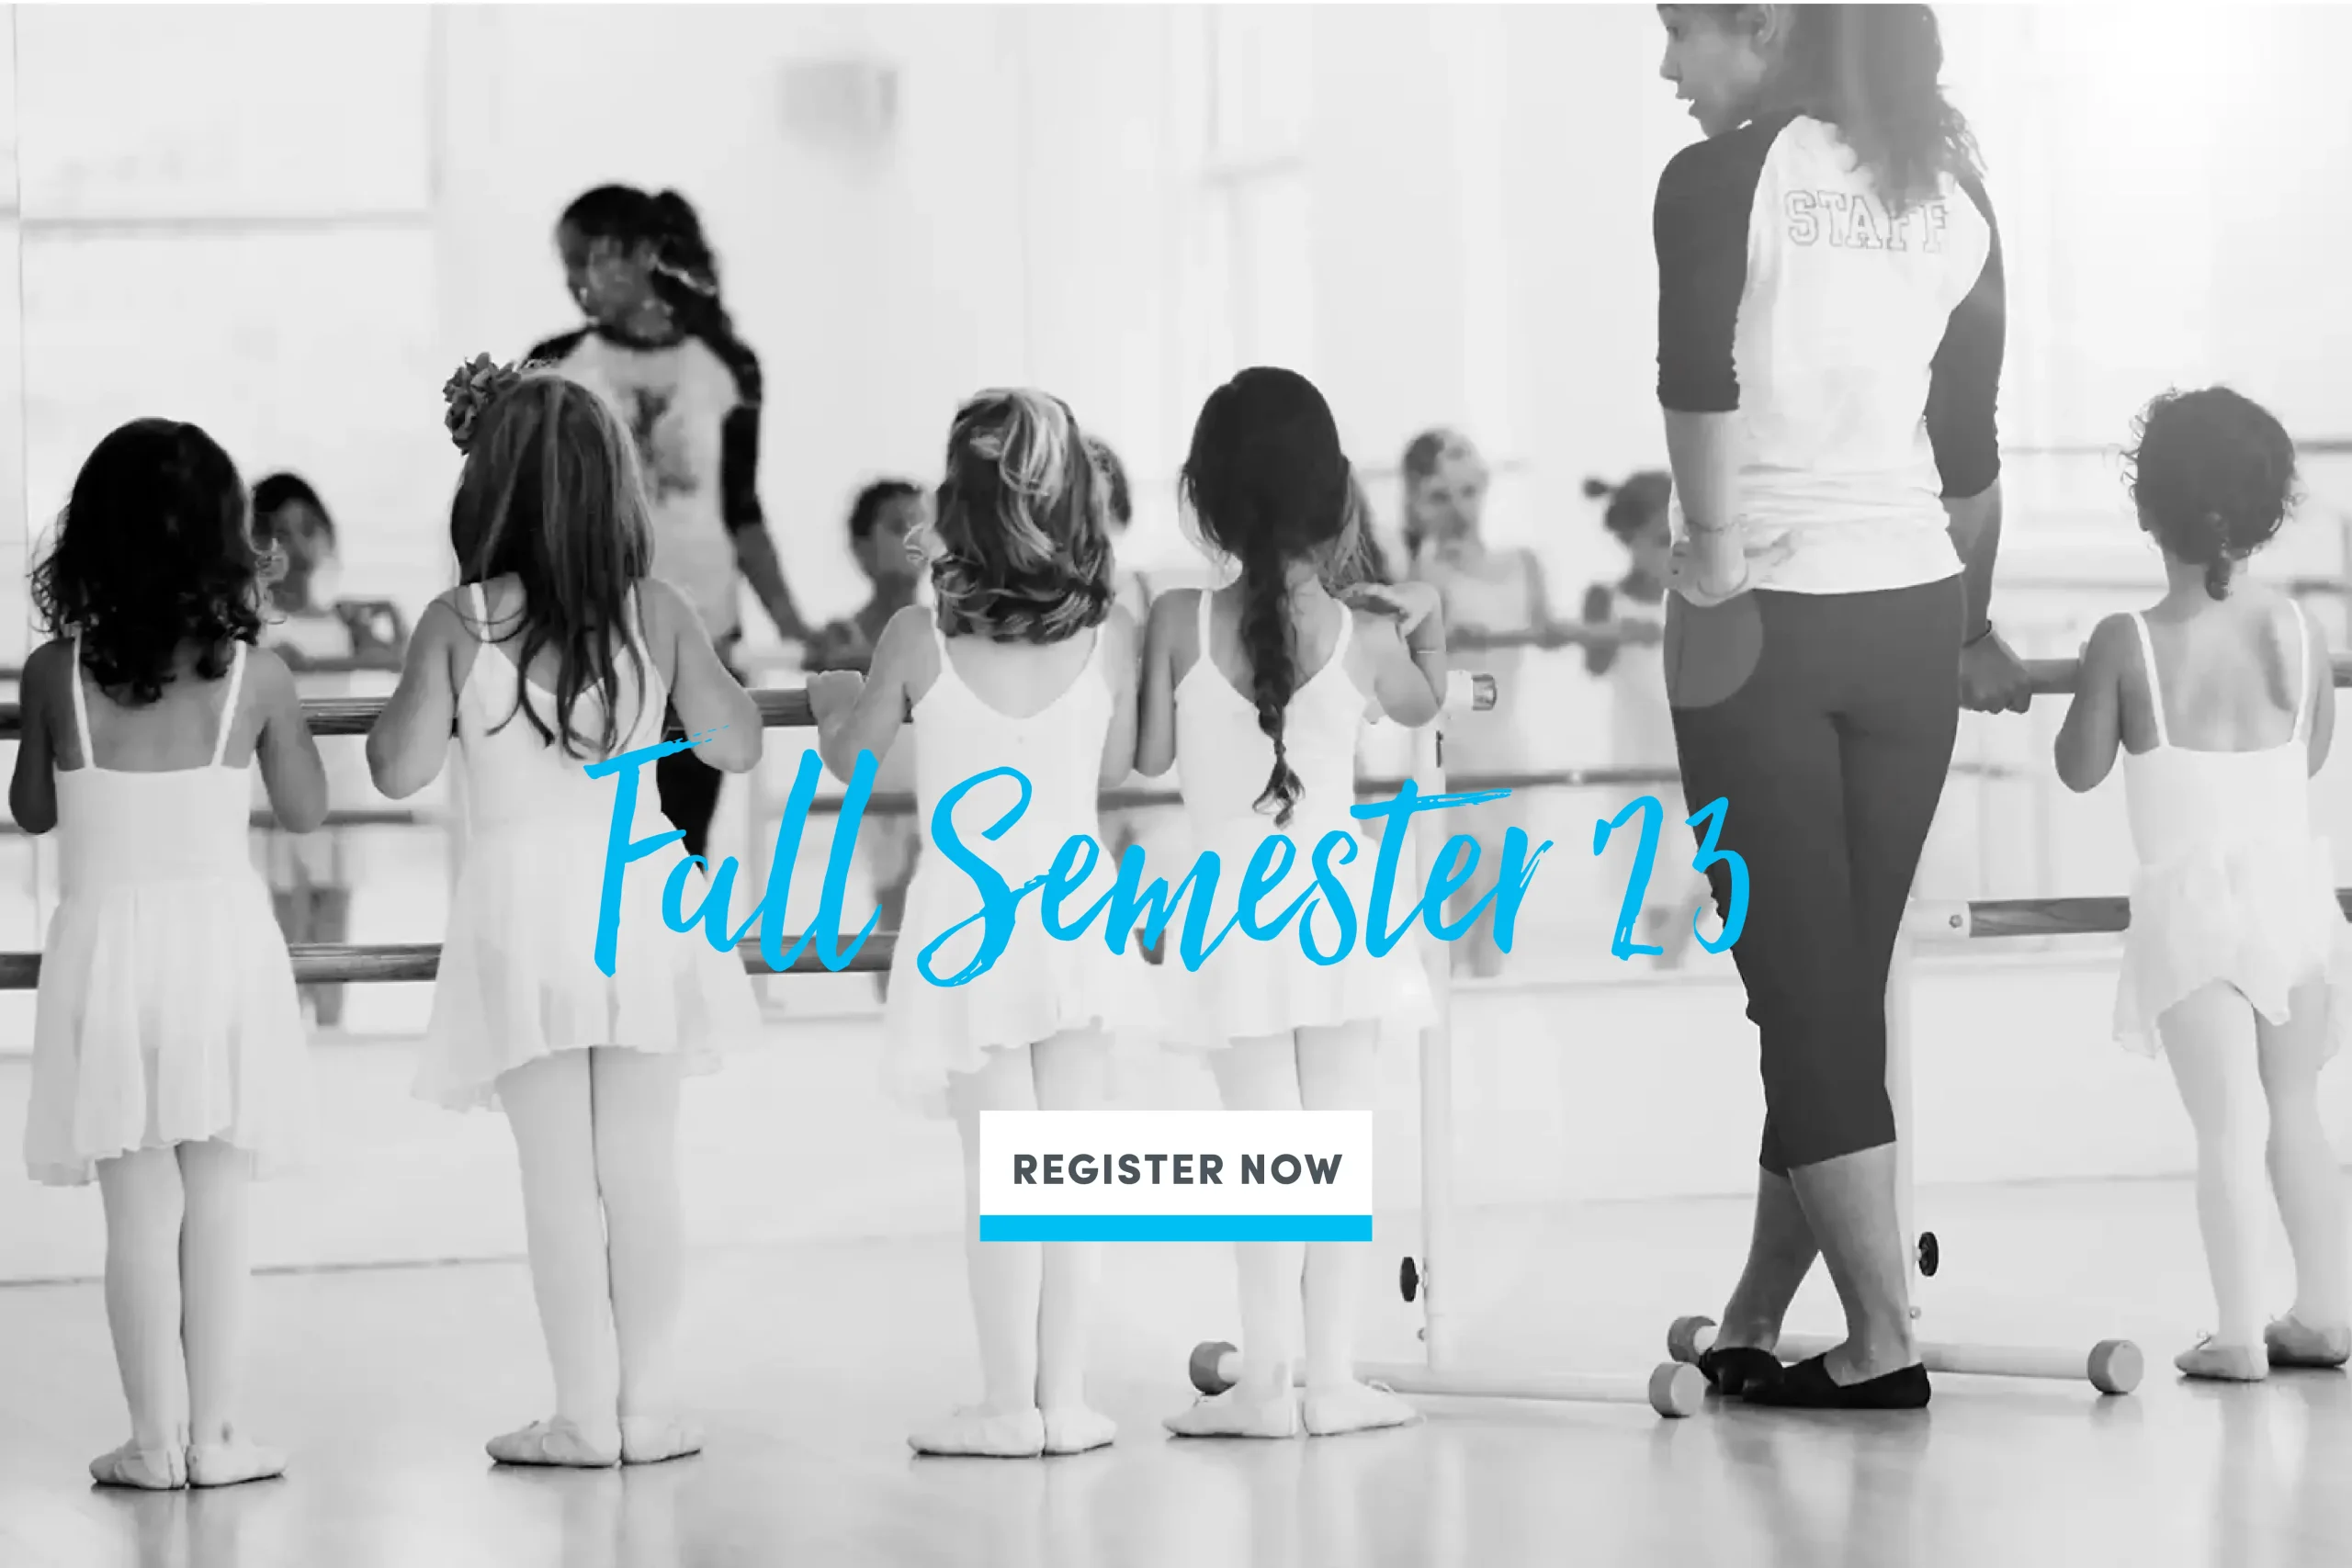 Our complete New York fall semester of dance classes for your child